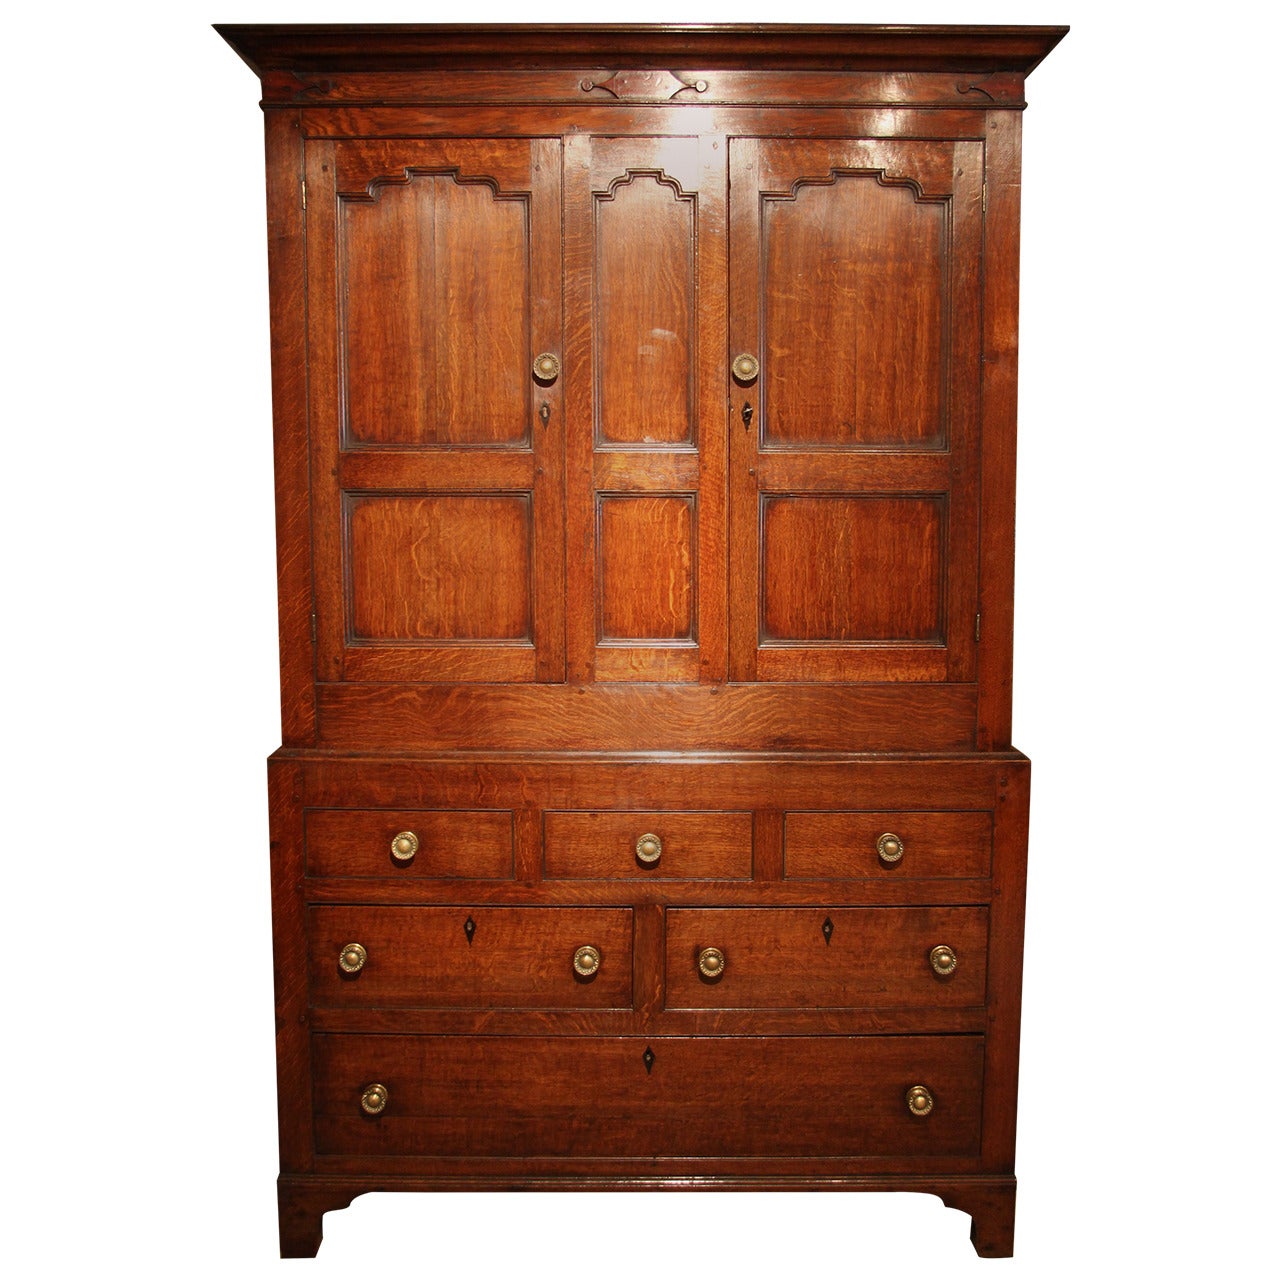 Handsome Early 19th Century Oak Livery or Linen Cupboard, circa 1820